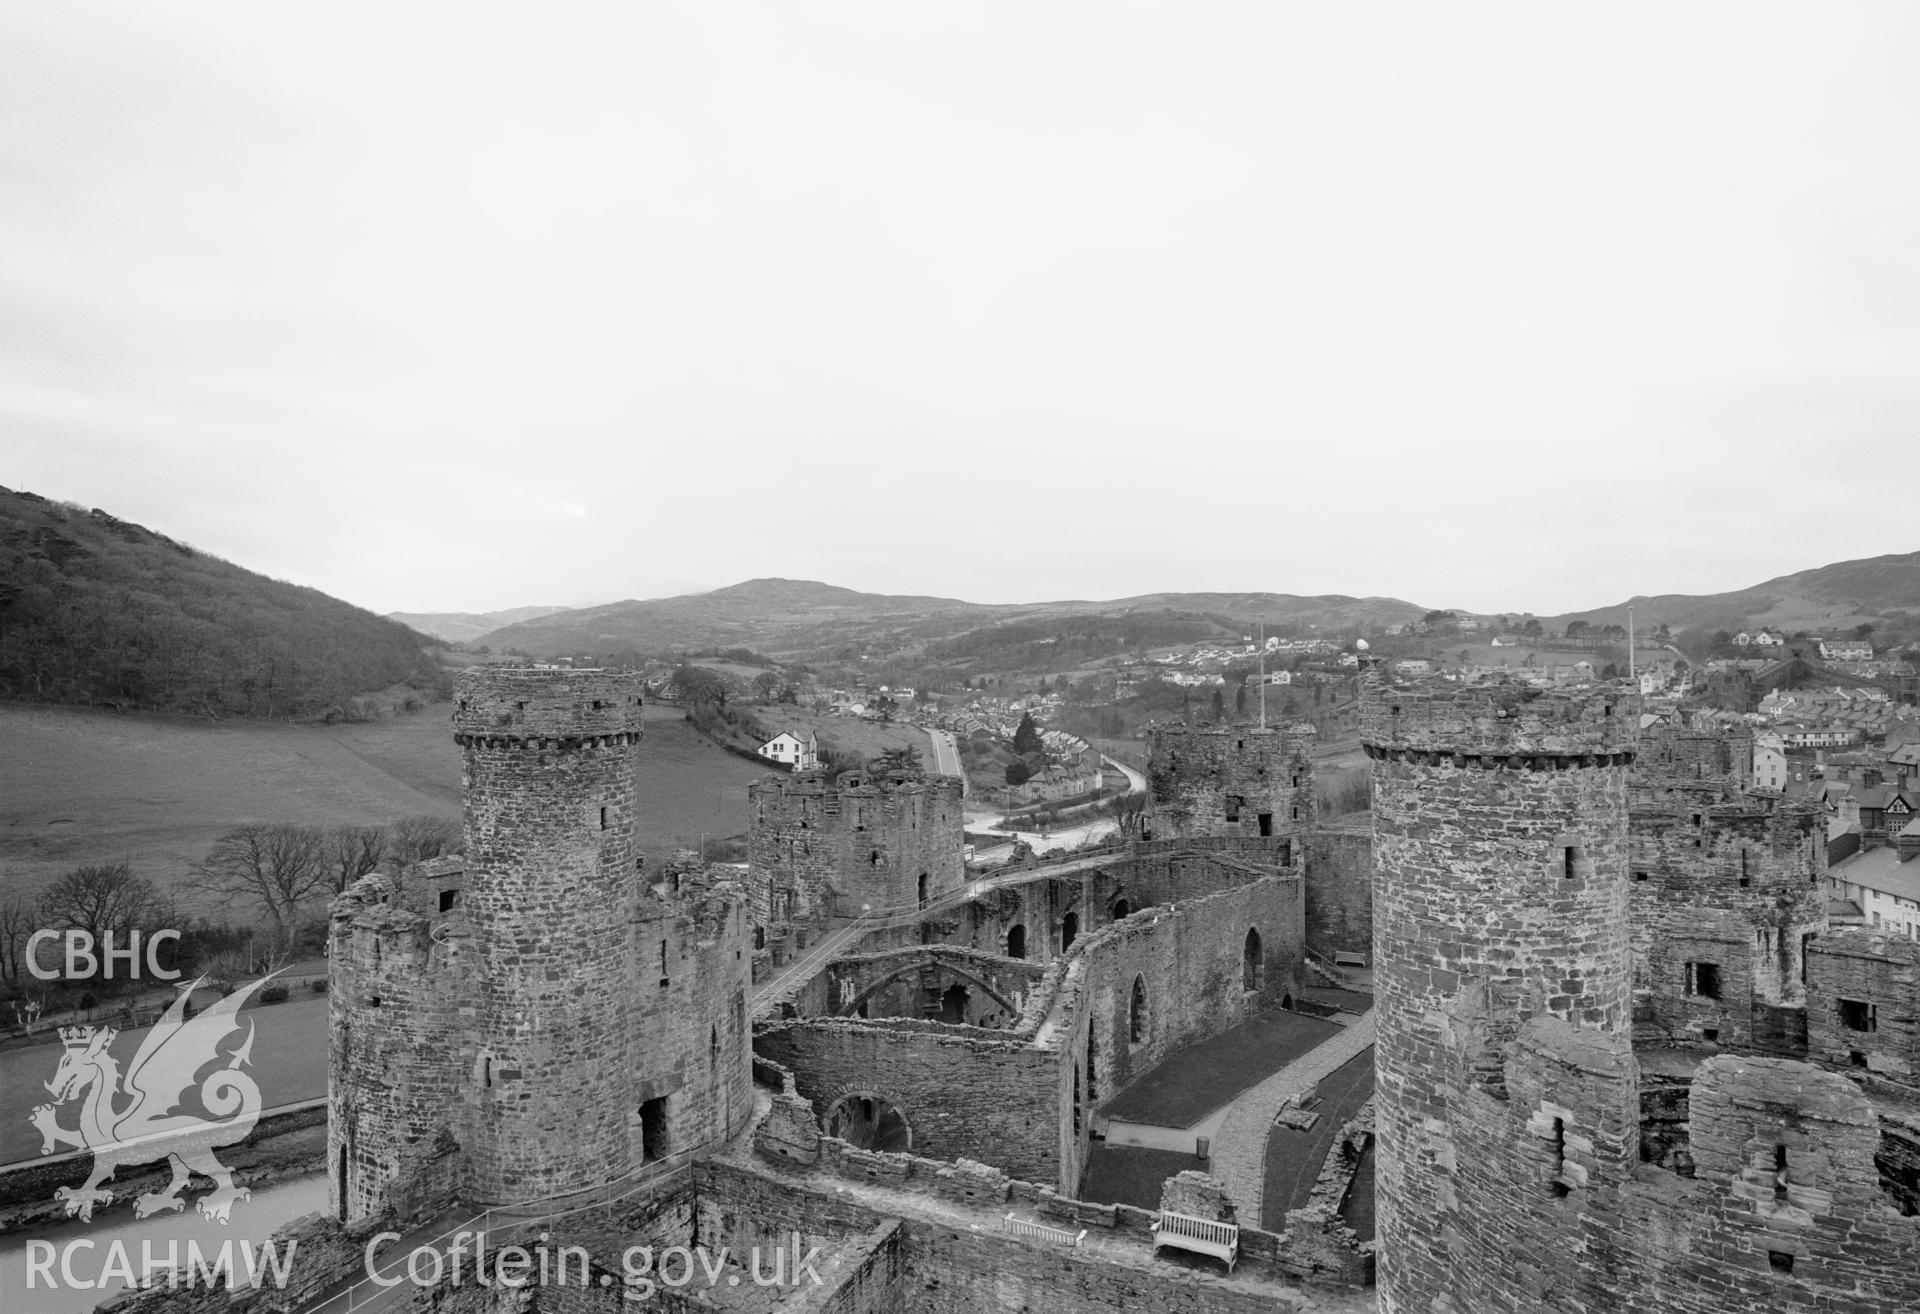 Photographic negative showing view of Harlech from the castle; collated by the former Central Office of Information.